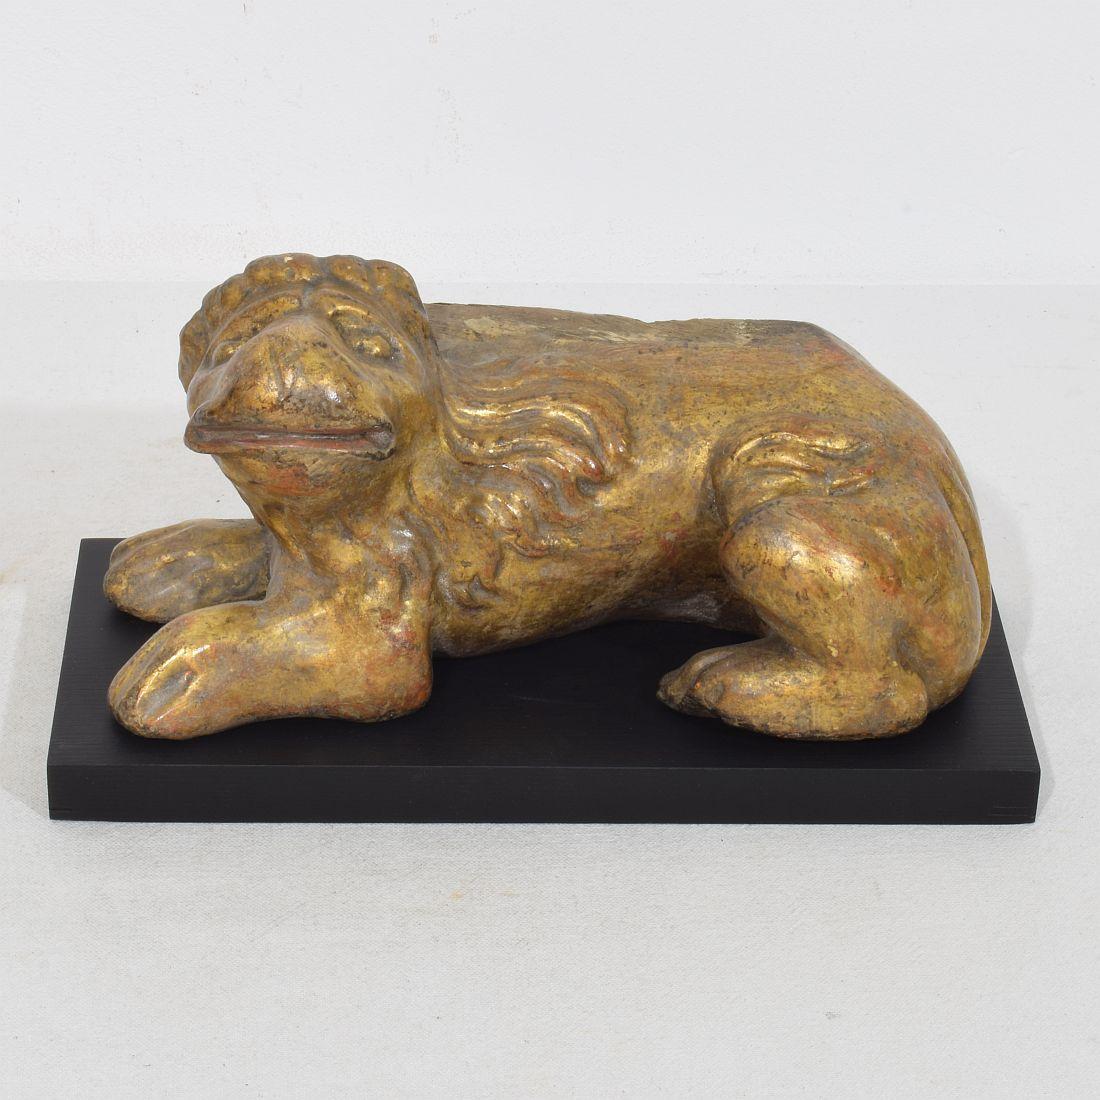 Unique period piece. Extremely rare 16th century Italian hand carved lion. Most likely once part of a piece of furniture. Beautifully carved in a simple folk art way with traces of its original gilding. Italy circa 1500-1600. Weathered Measurements